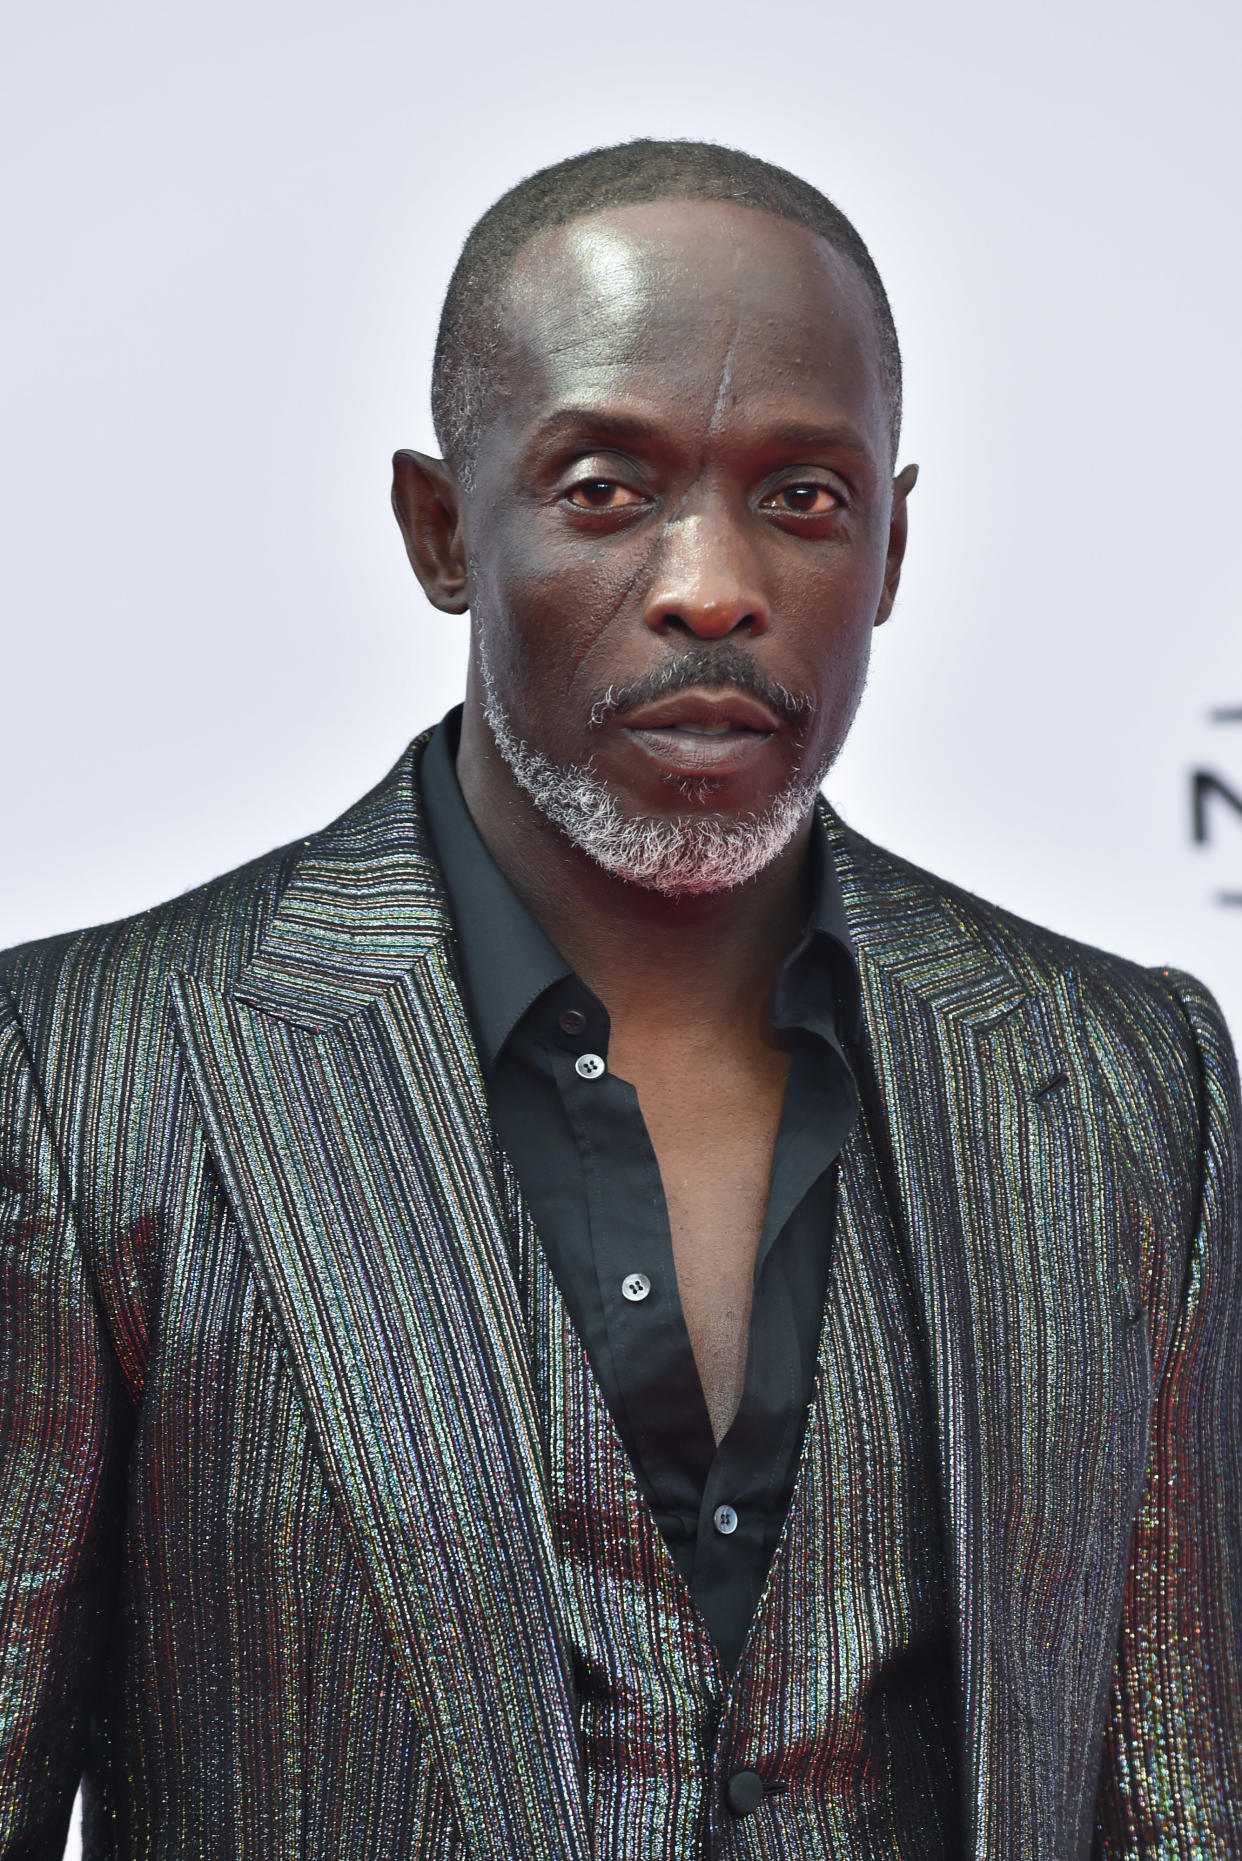 LOS ANGELES, CALIFORNIA - JUNE 27: Actor Michael K. Williams attends the 2021 BET Awards at the Microsoft Theater on June 27, 2021 in Los Angeles, California. (Photo by Aaron J. Thornton/Getty Images)